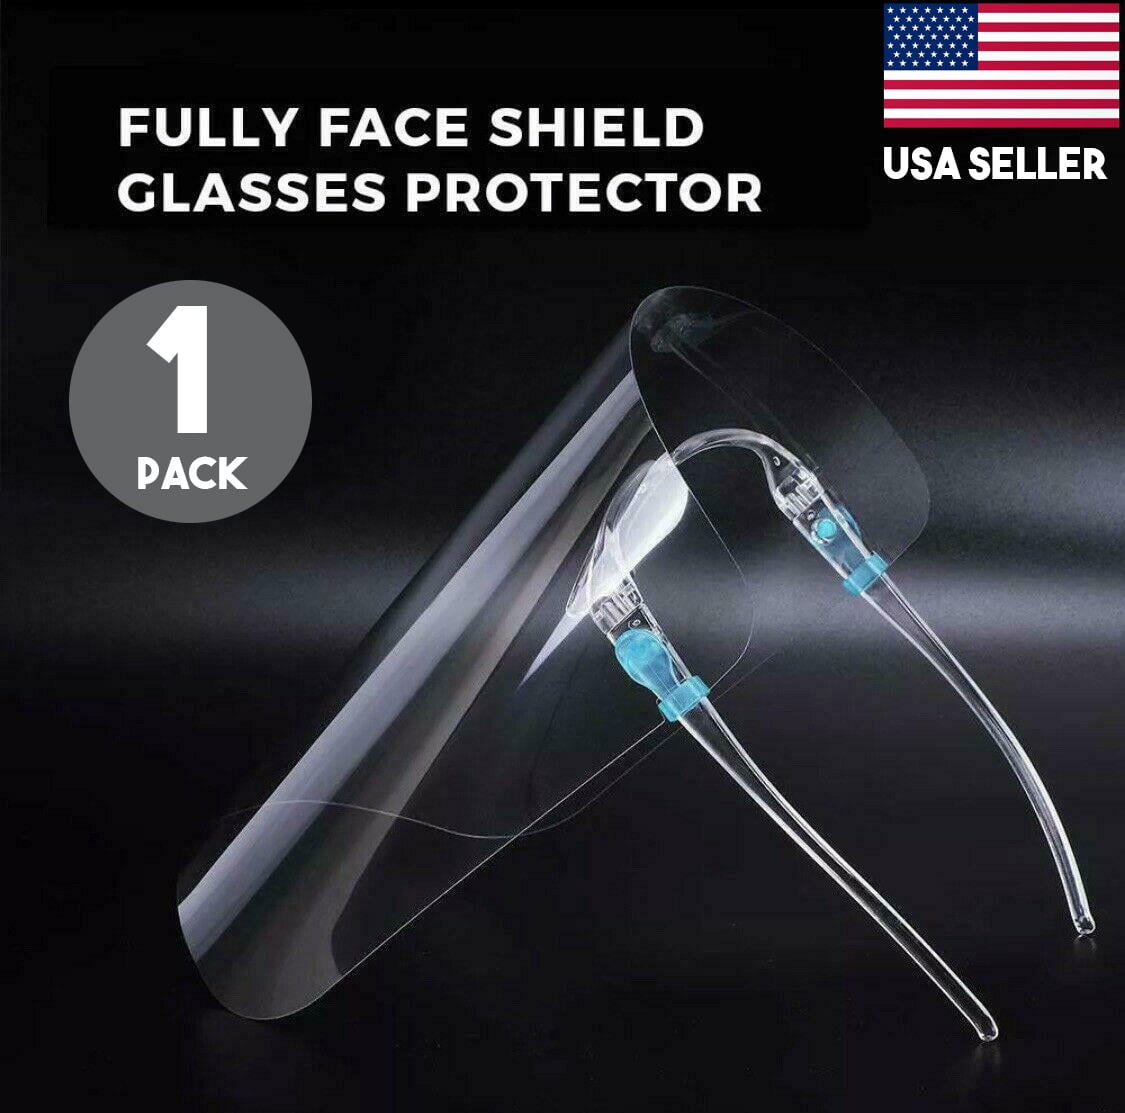 Details about   JSC 5 piece Eye Glass FaceShield Full Face Safety Protector Clear  SHIP FROM USA 